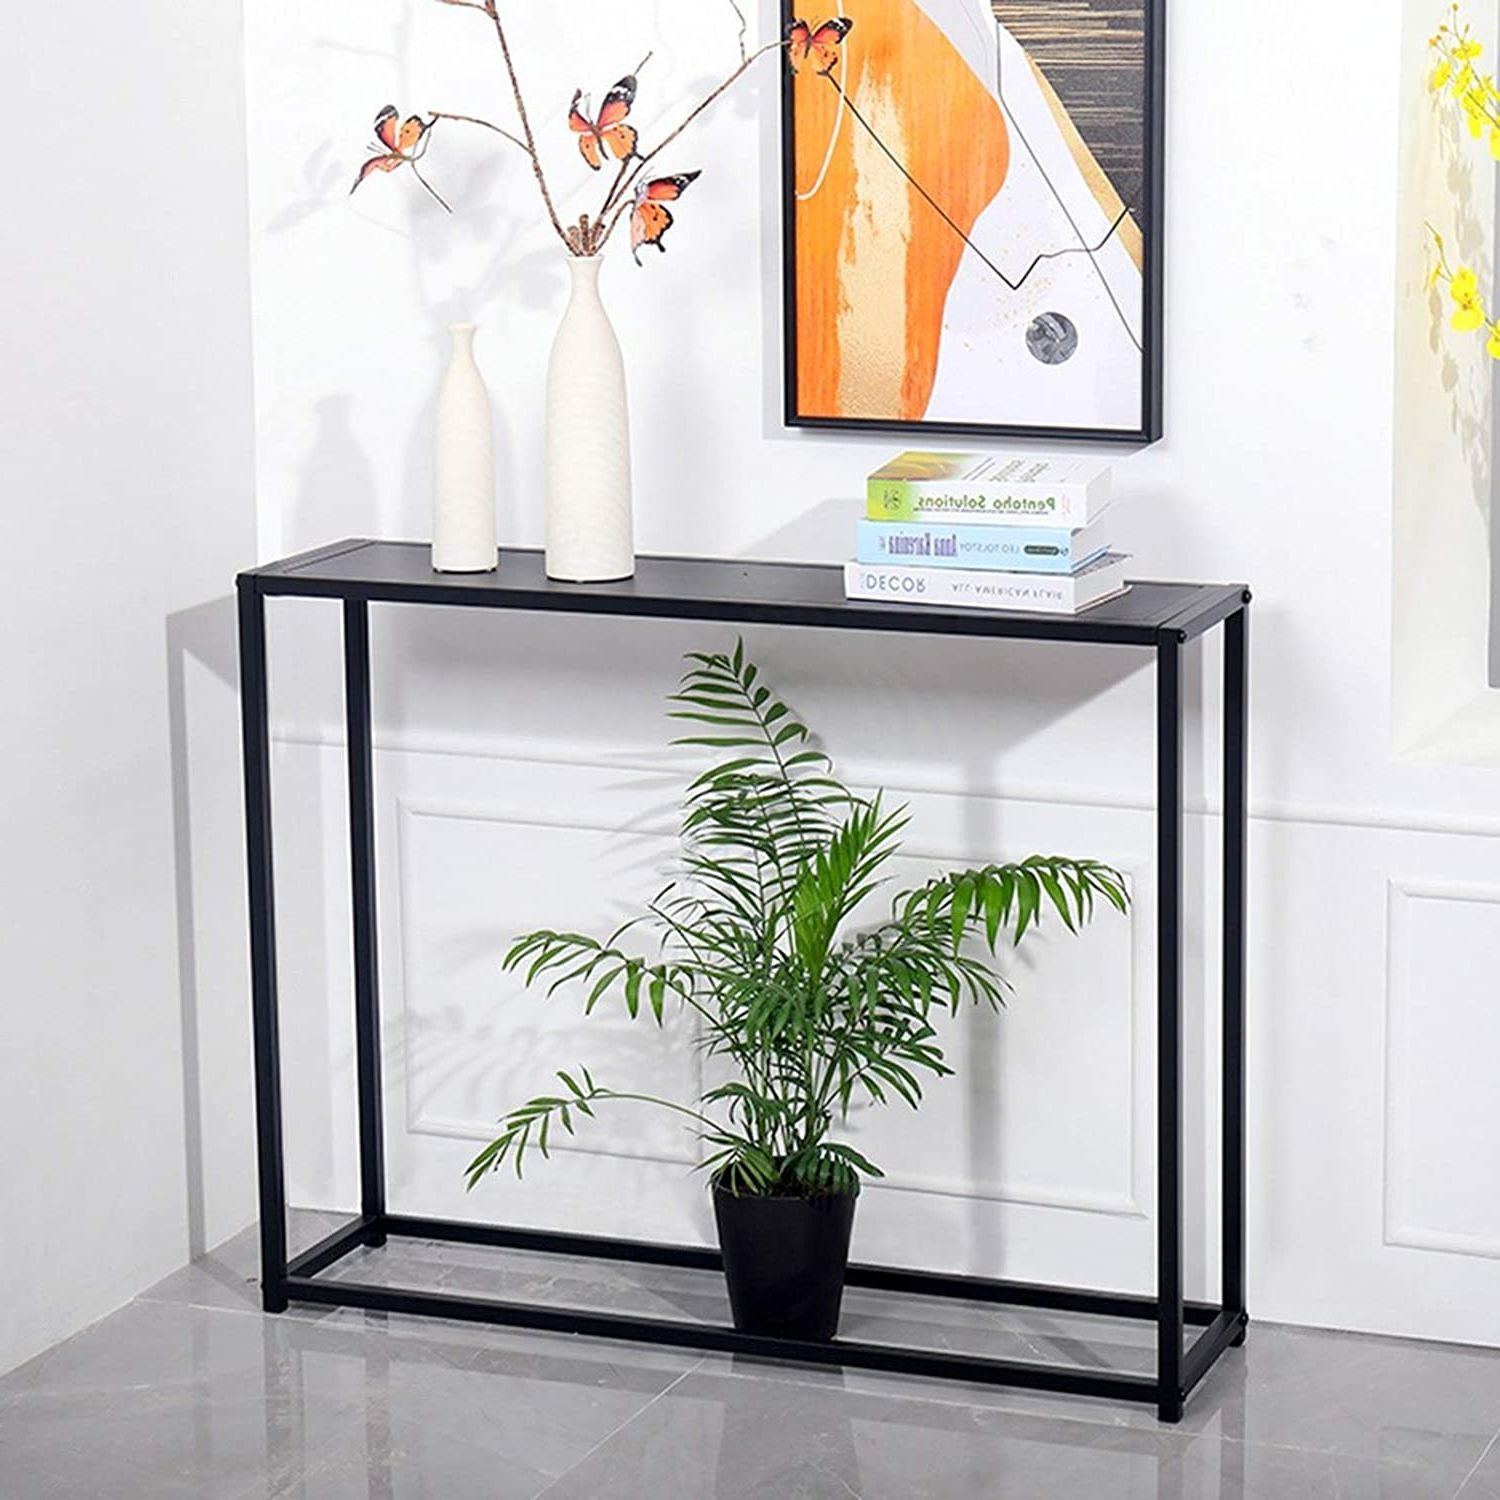 Widely Used Caviar Black Console Tables With Regard To Modern Sofa Accent Table, Btmway Contemporary Narrow (View 7 of 10)